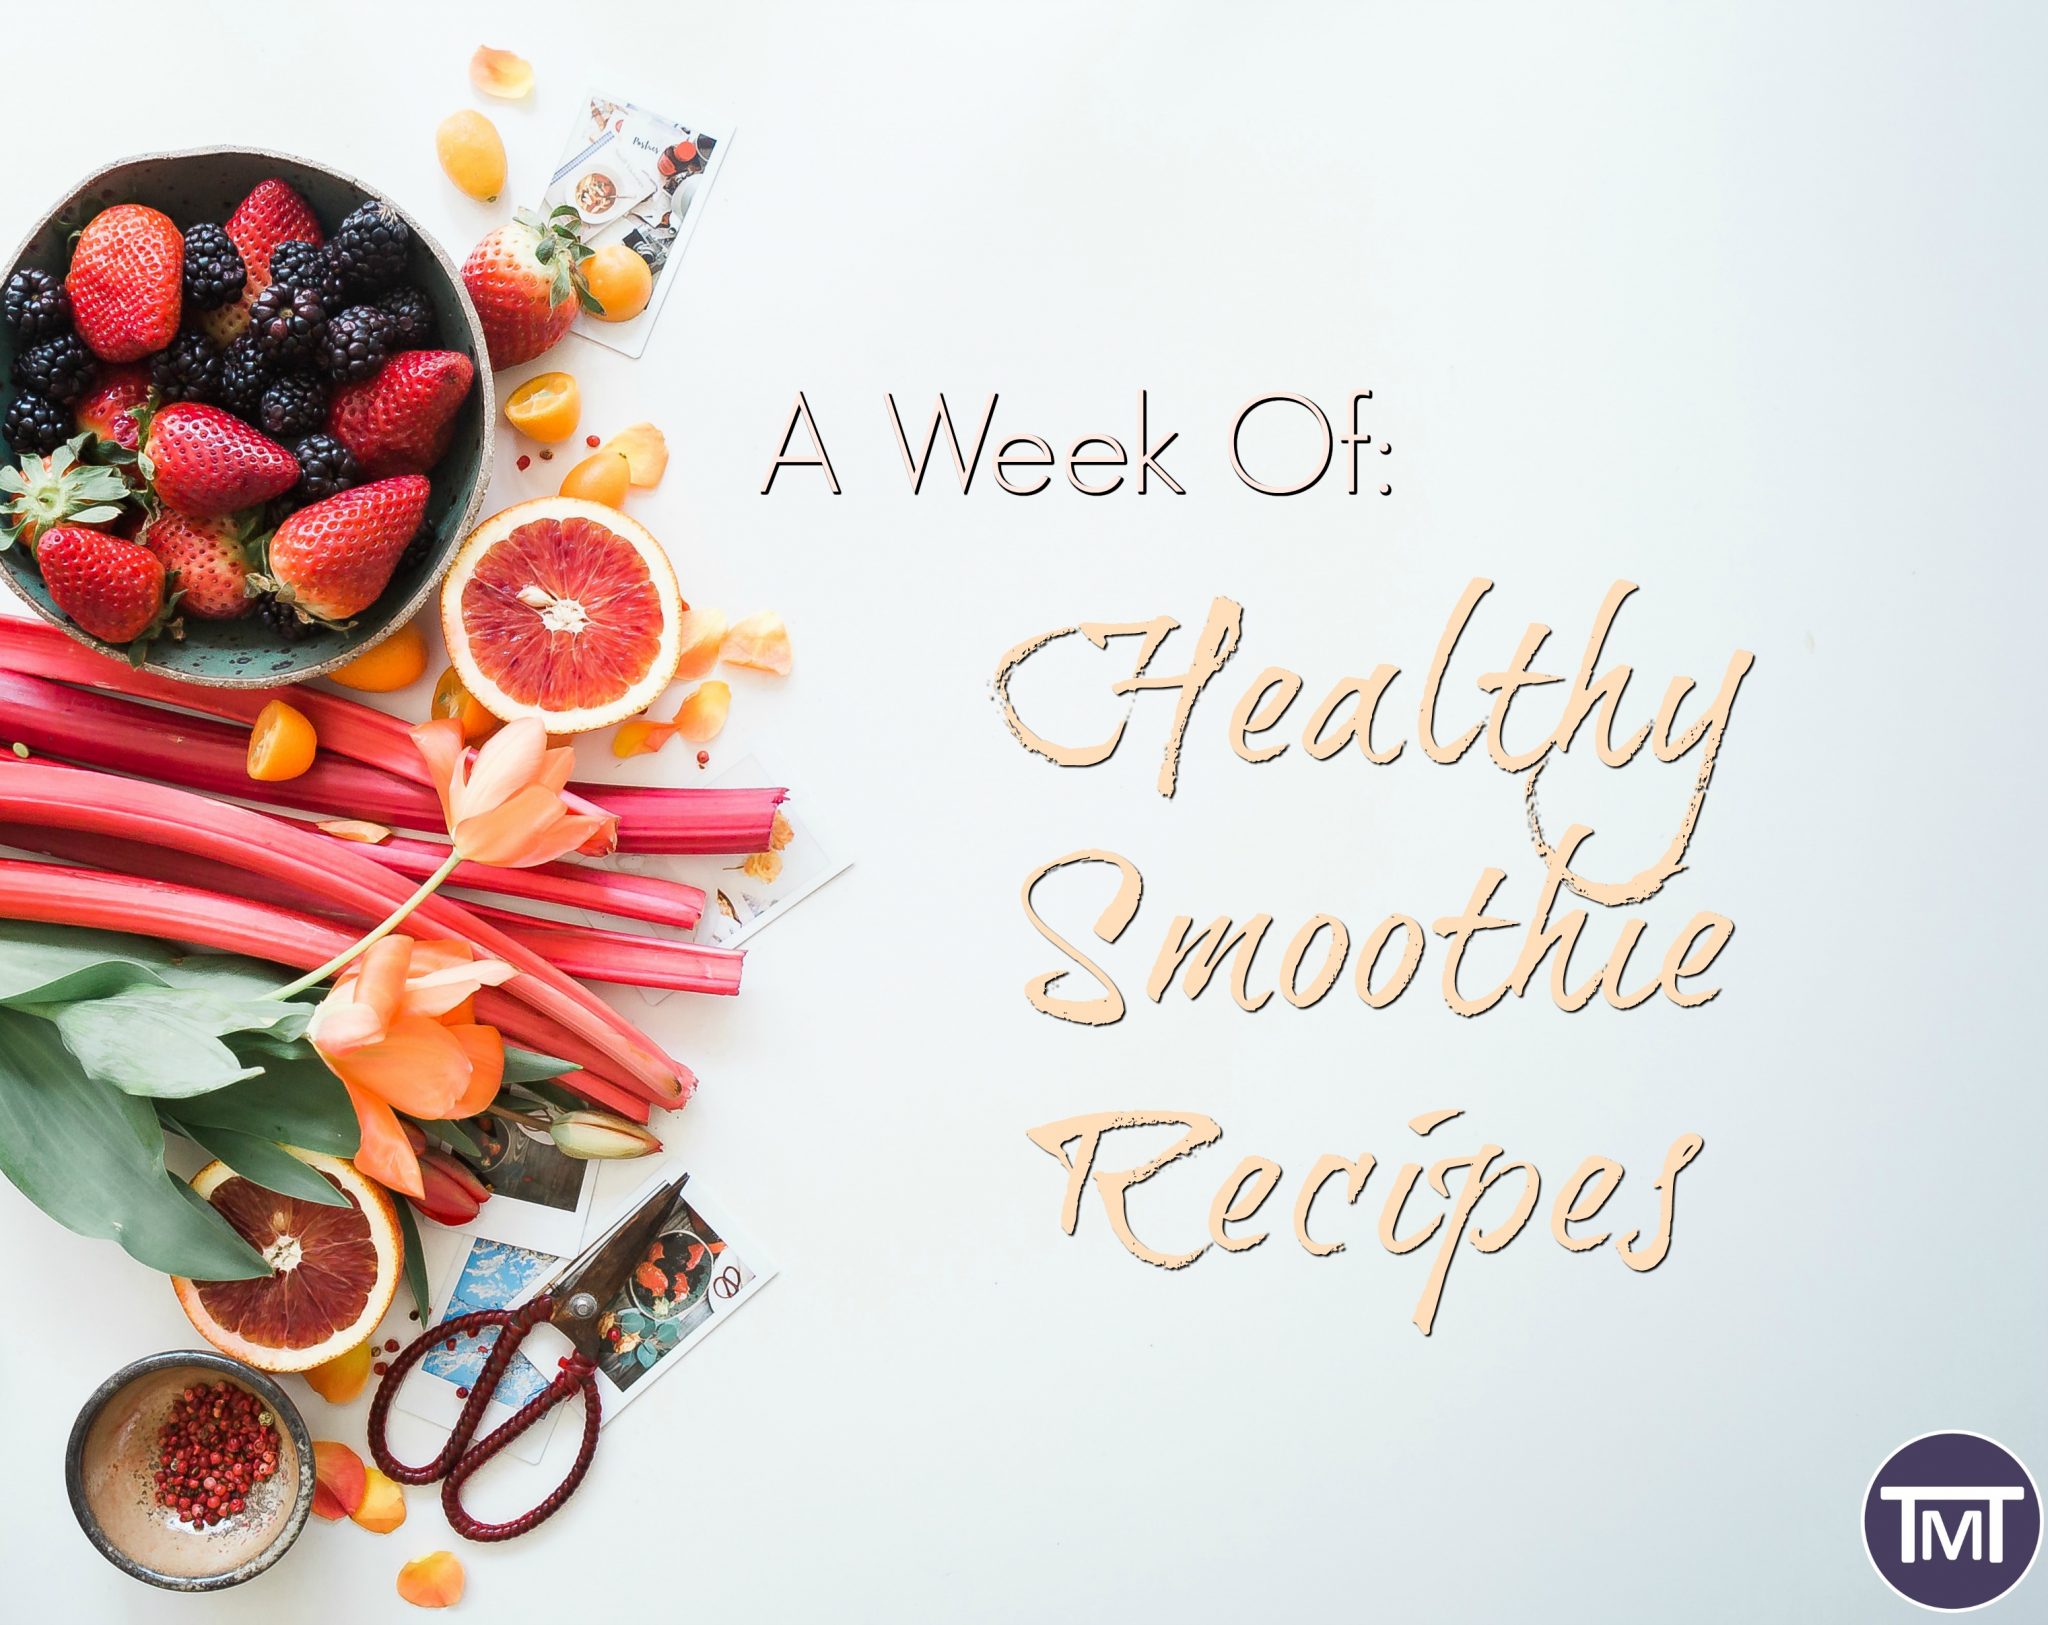 a week of healthy smoothie recipes feature